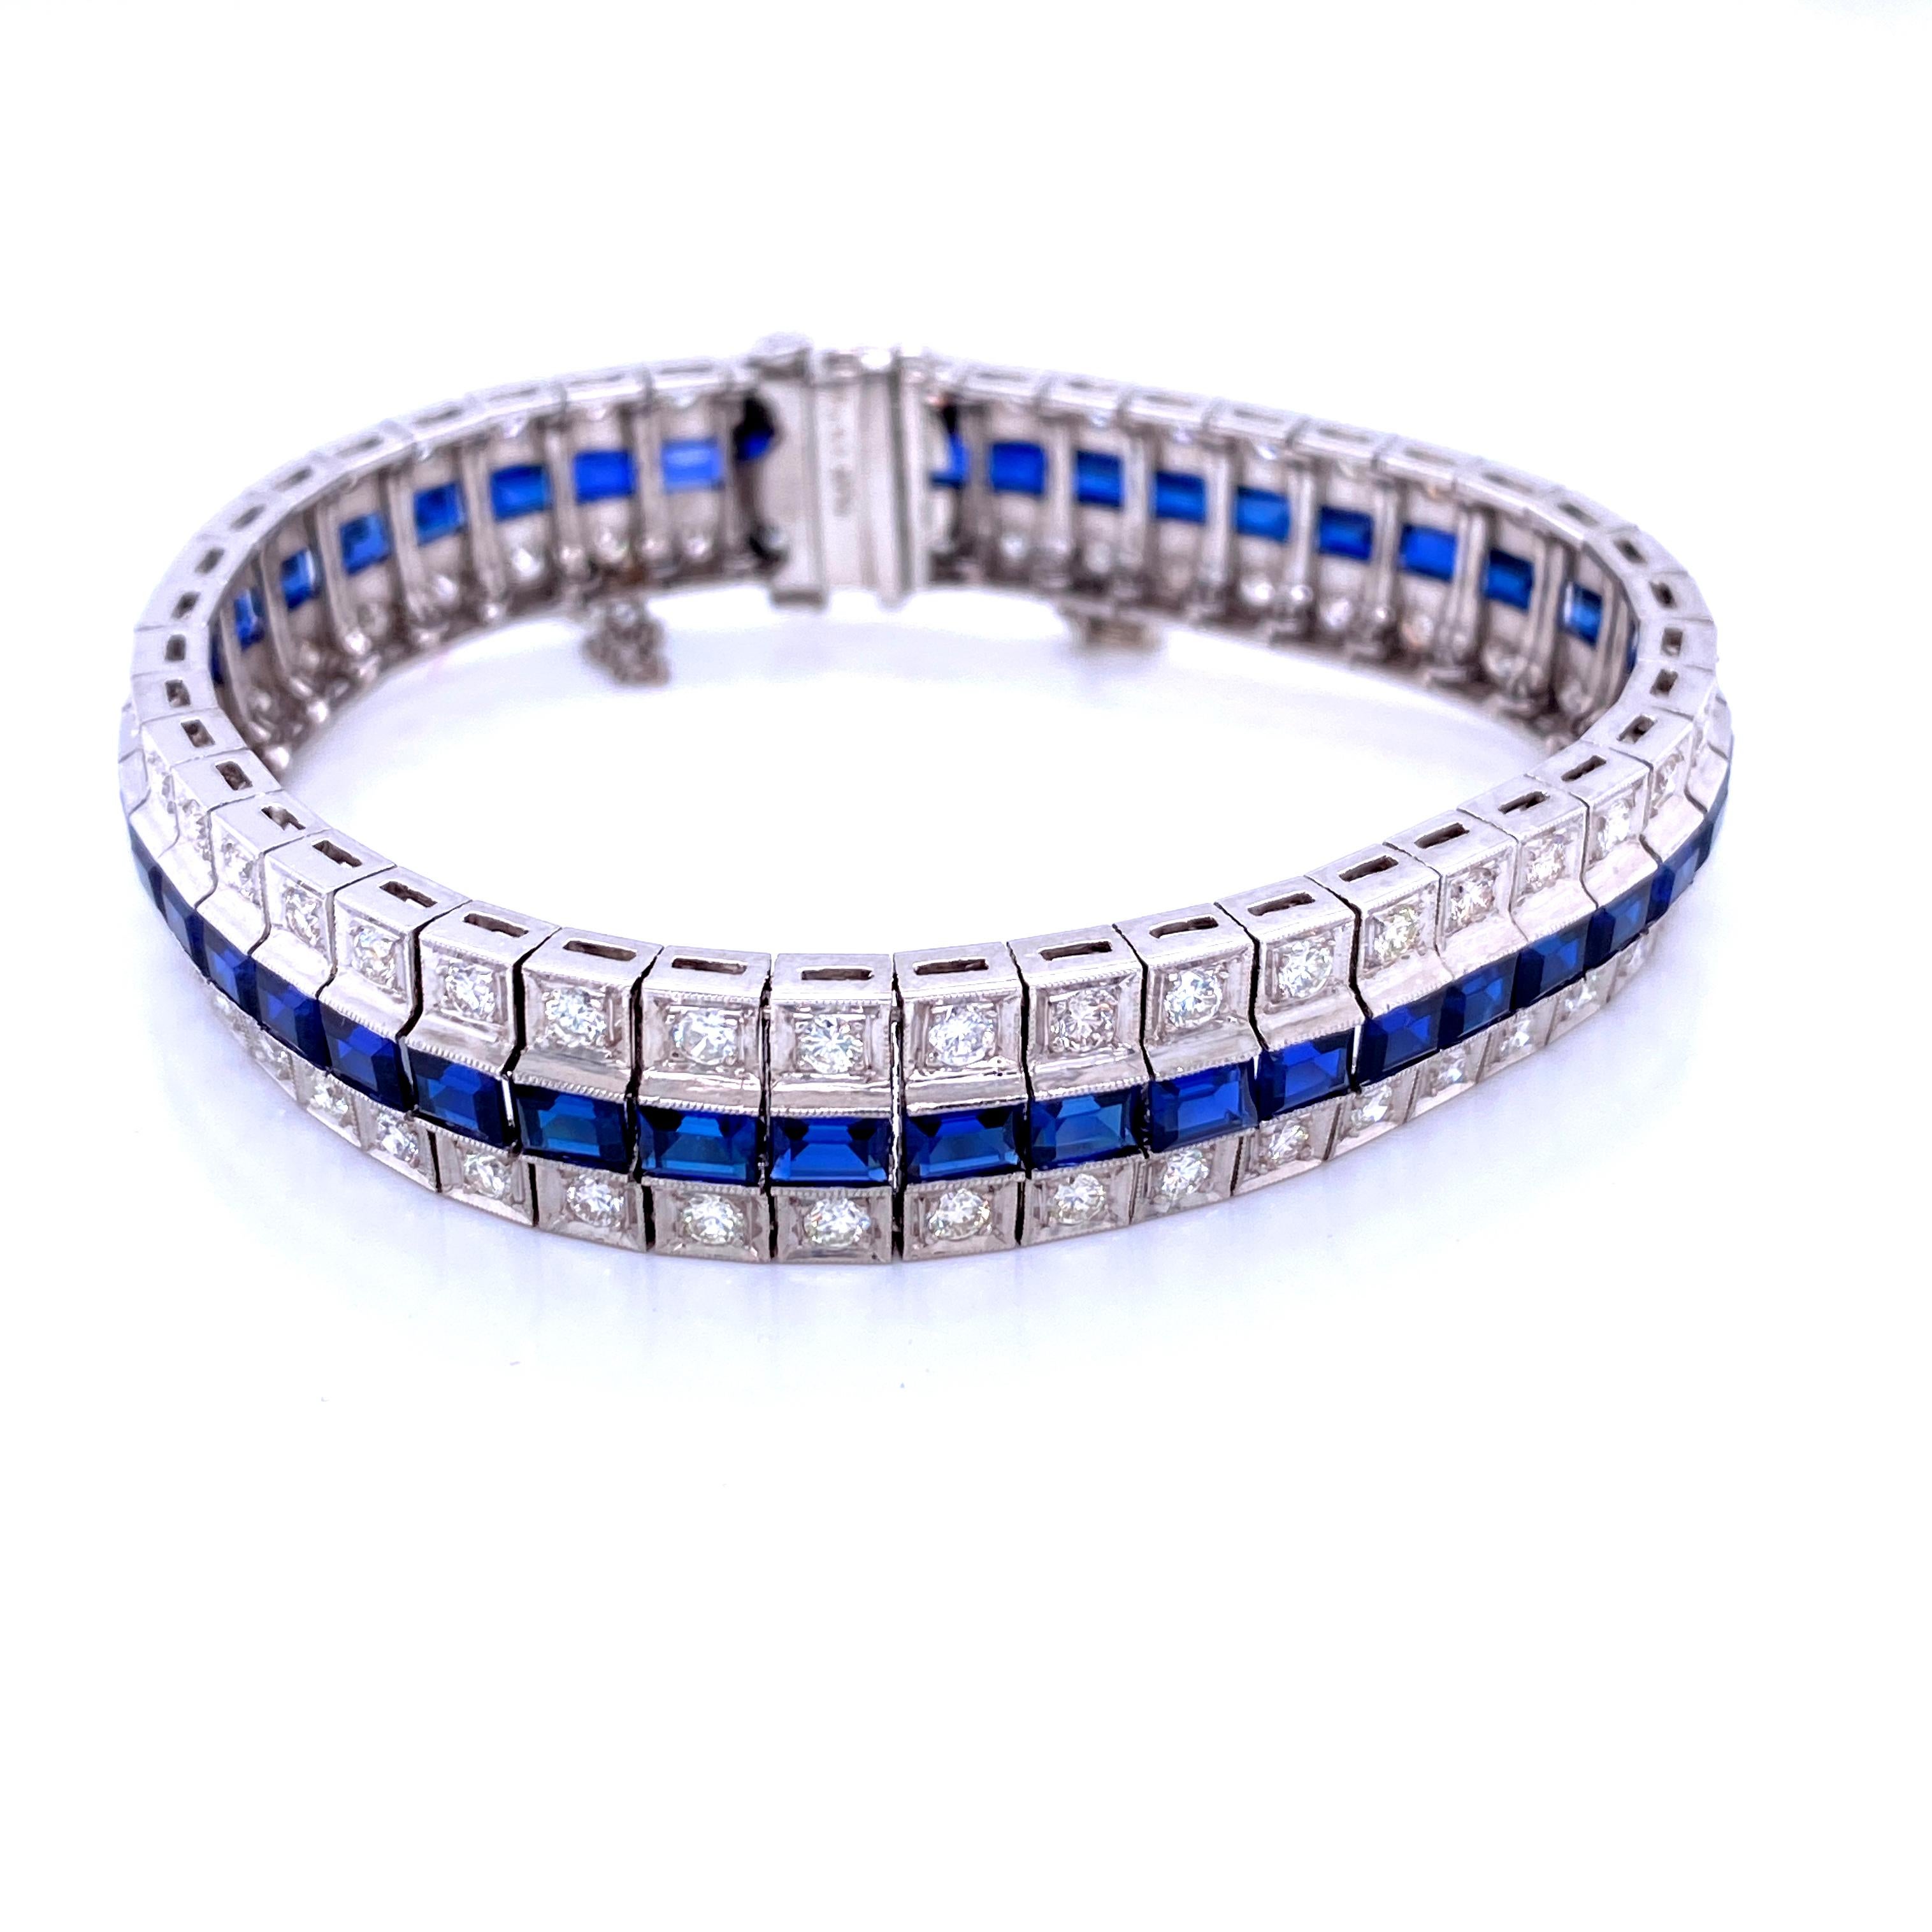 One platinum (stamped PLAT 5978) bracelet set with 4x3mm emerald cut synthetic sapphires in a center row with a row of round brilliant diamonds on either side, approximately 1.75 carats total weight with matching H/I color and VS2/SI1 clarity.  The